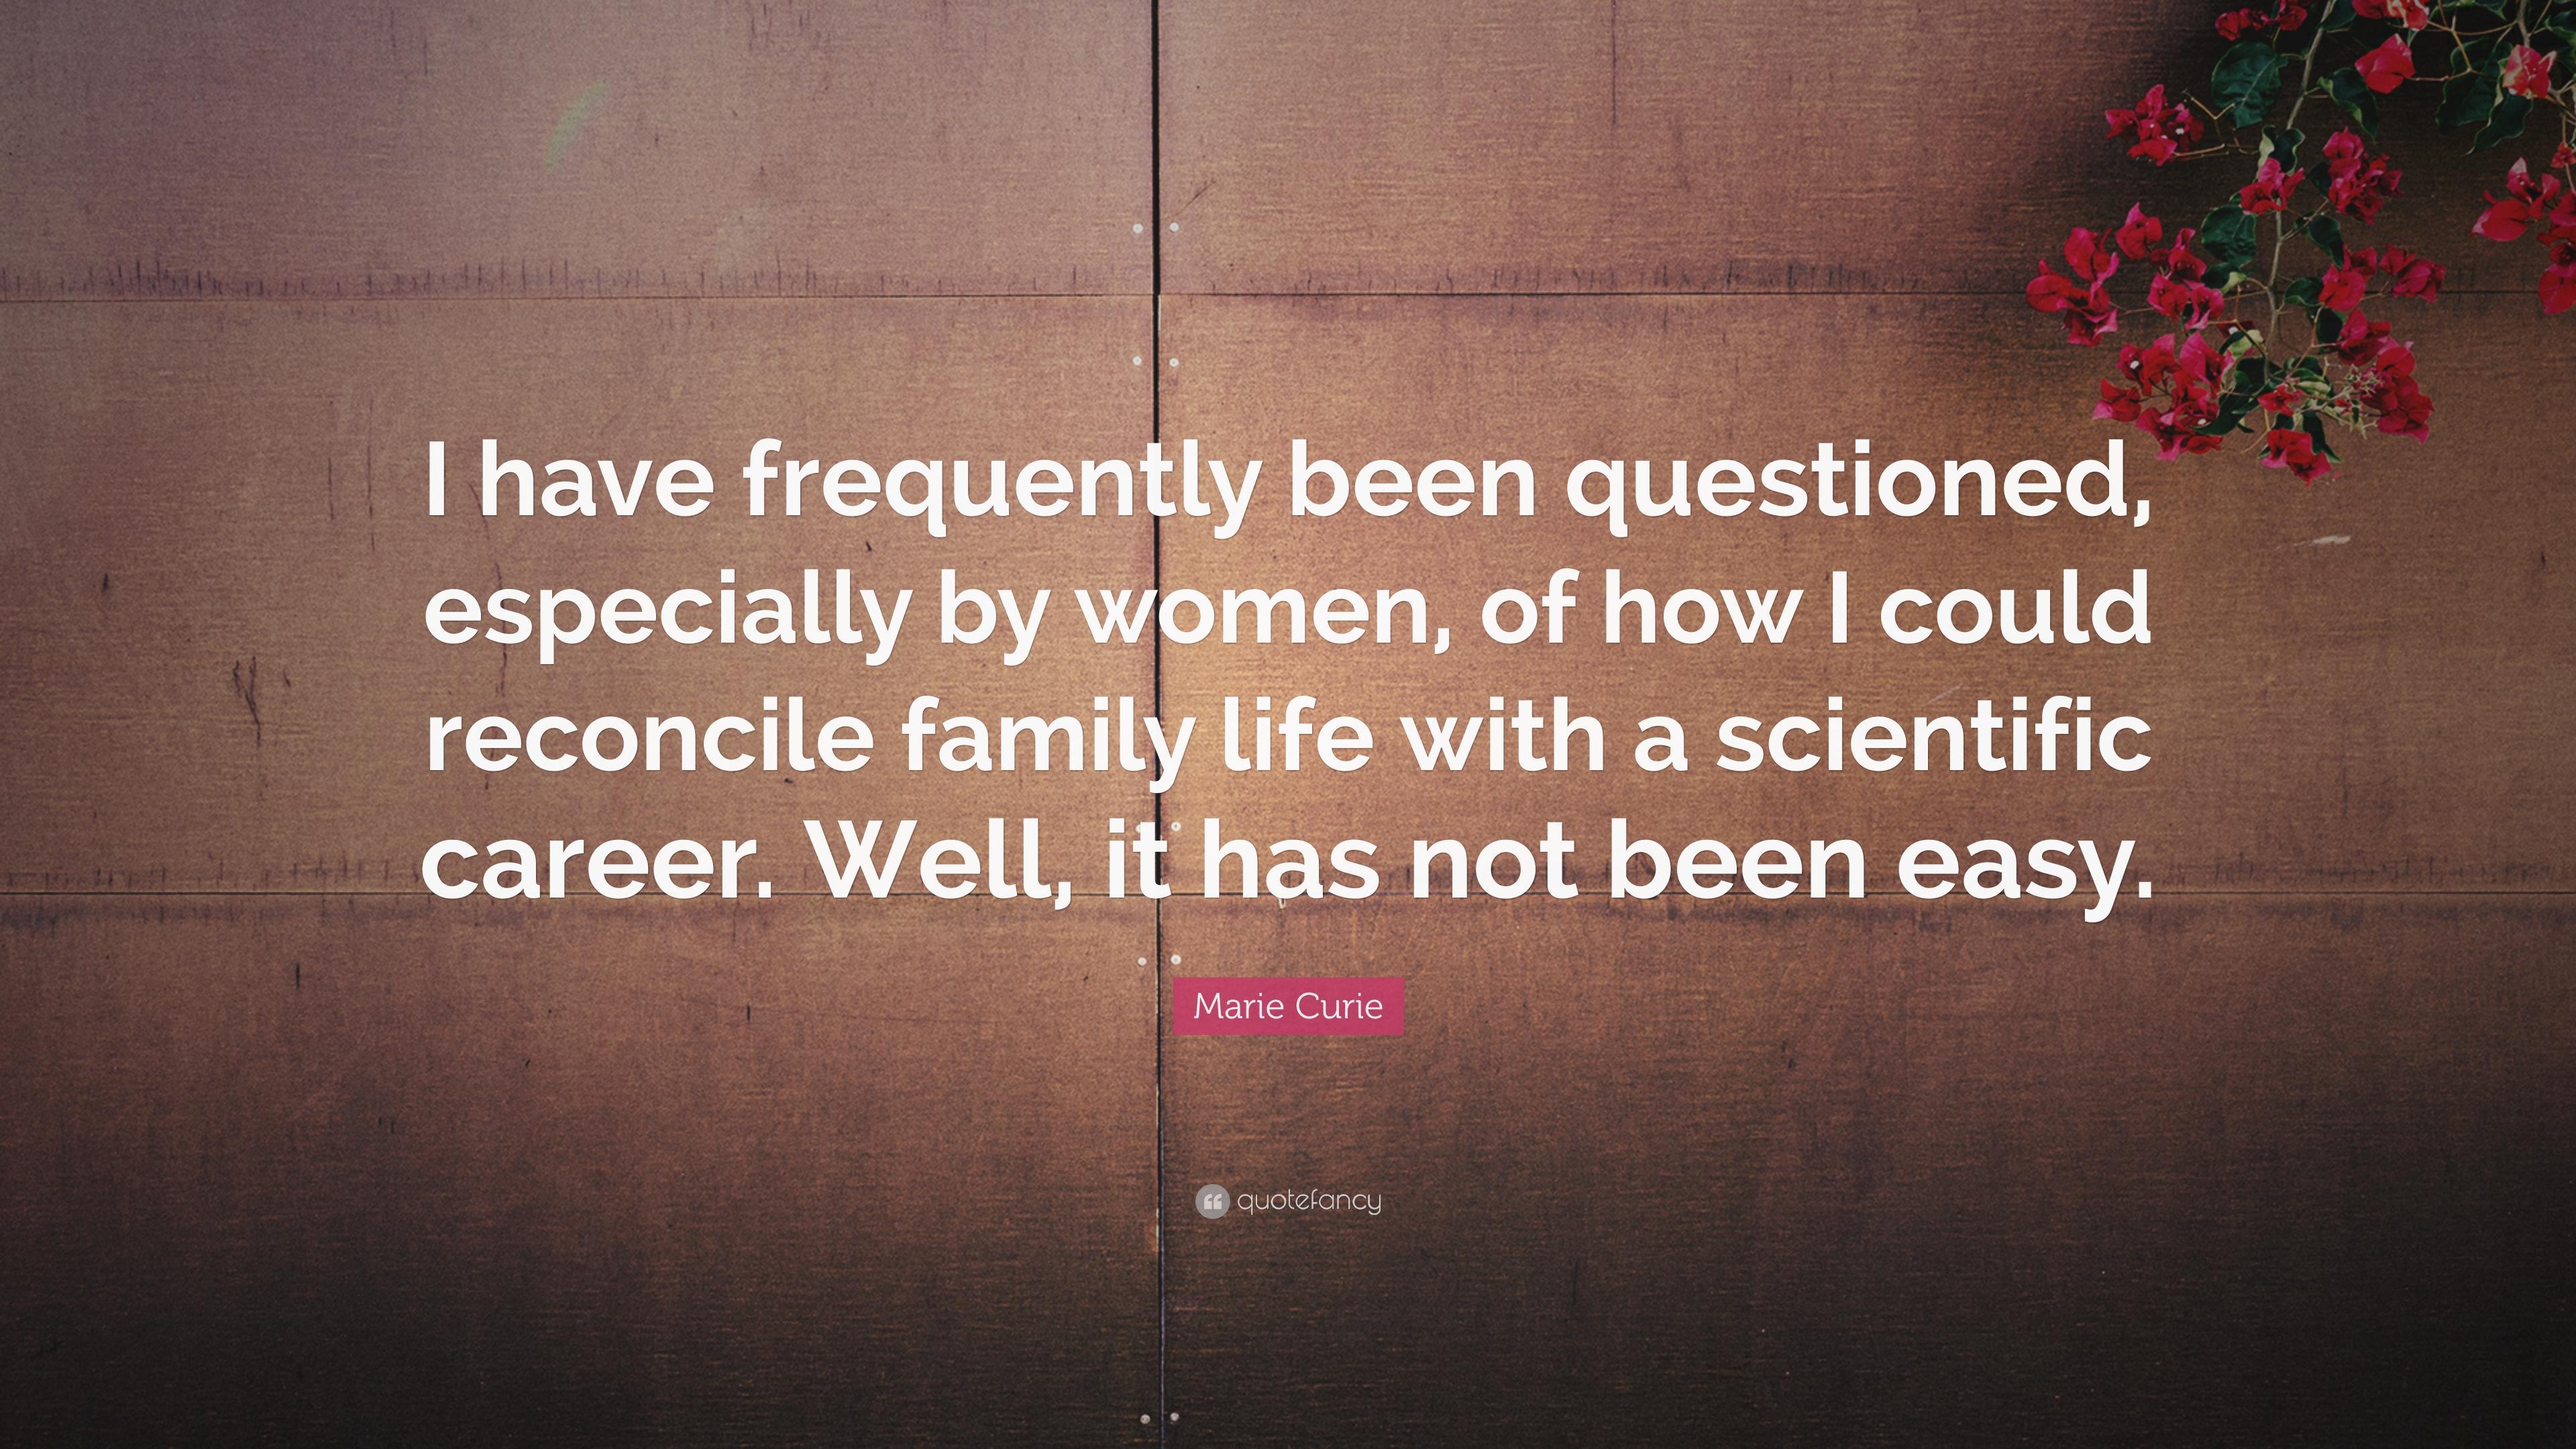 Marie Curie Quote: “I have frequently been questioned